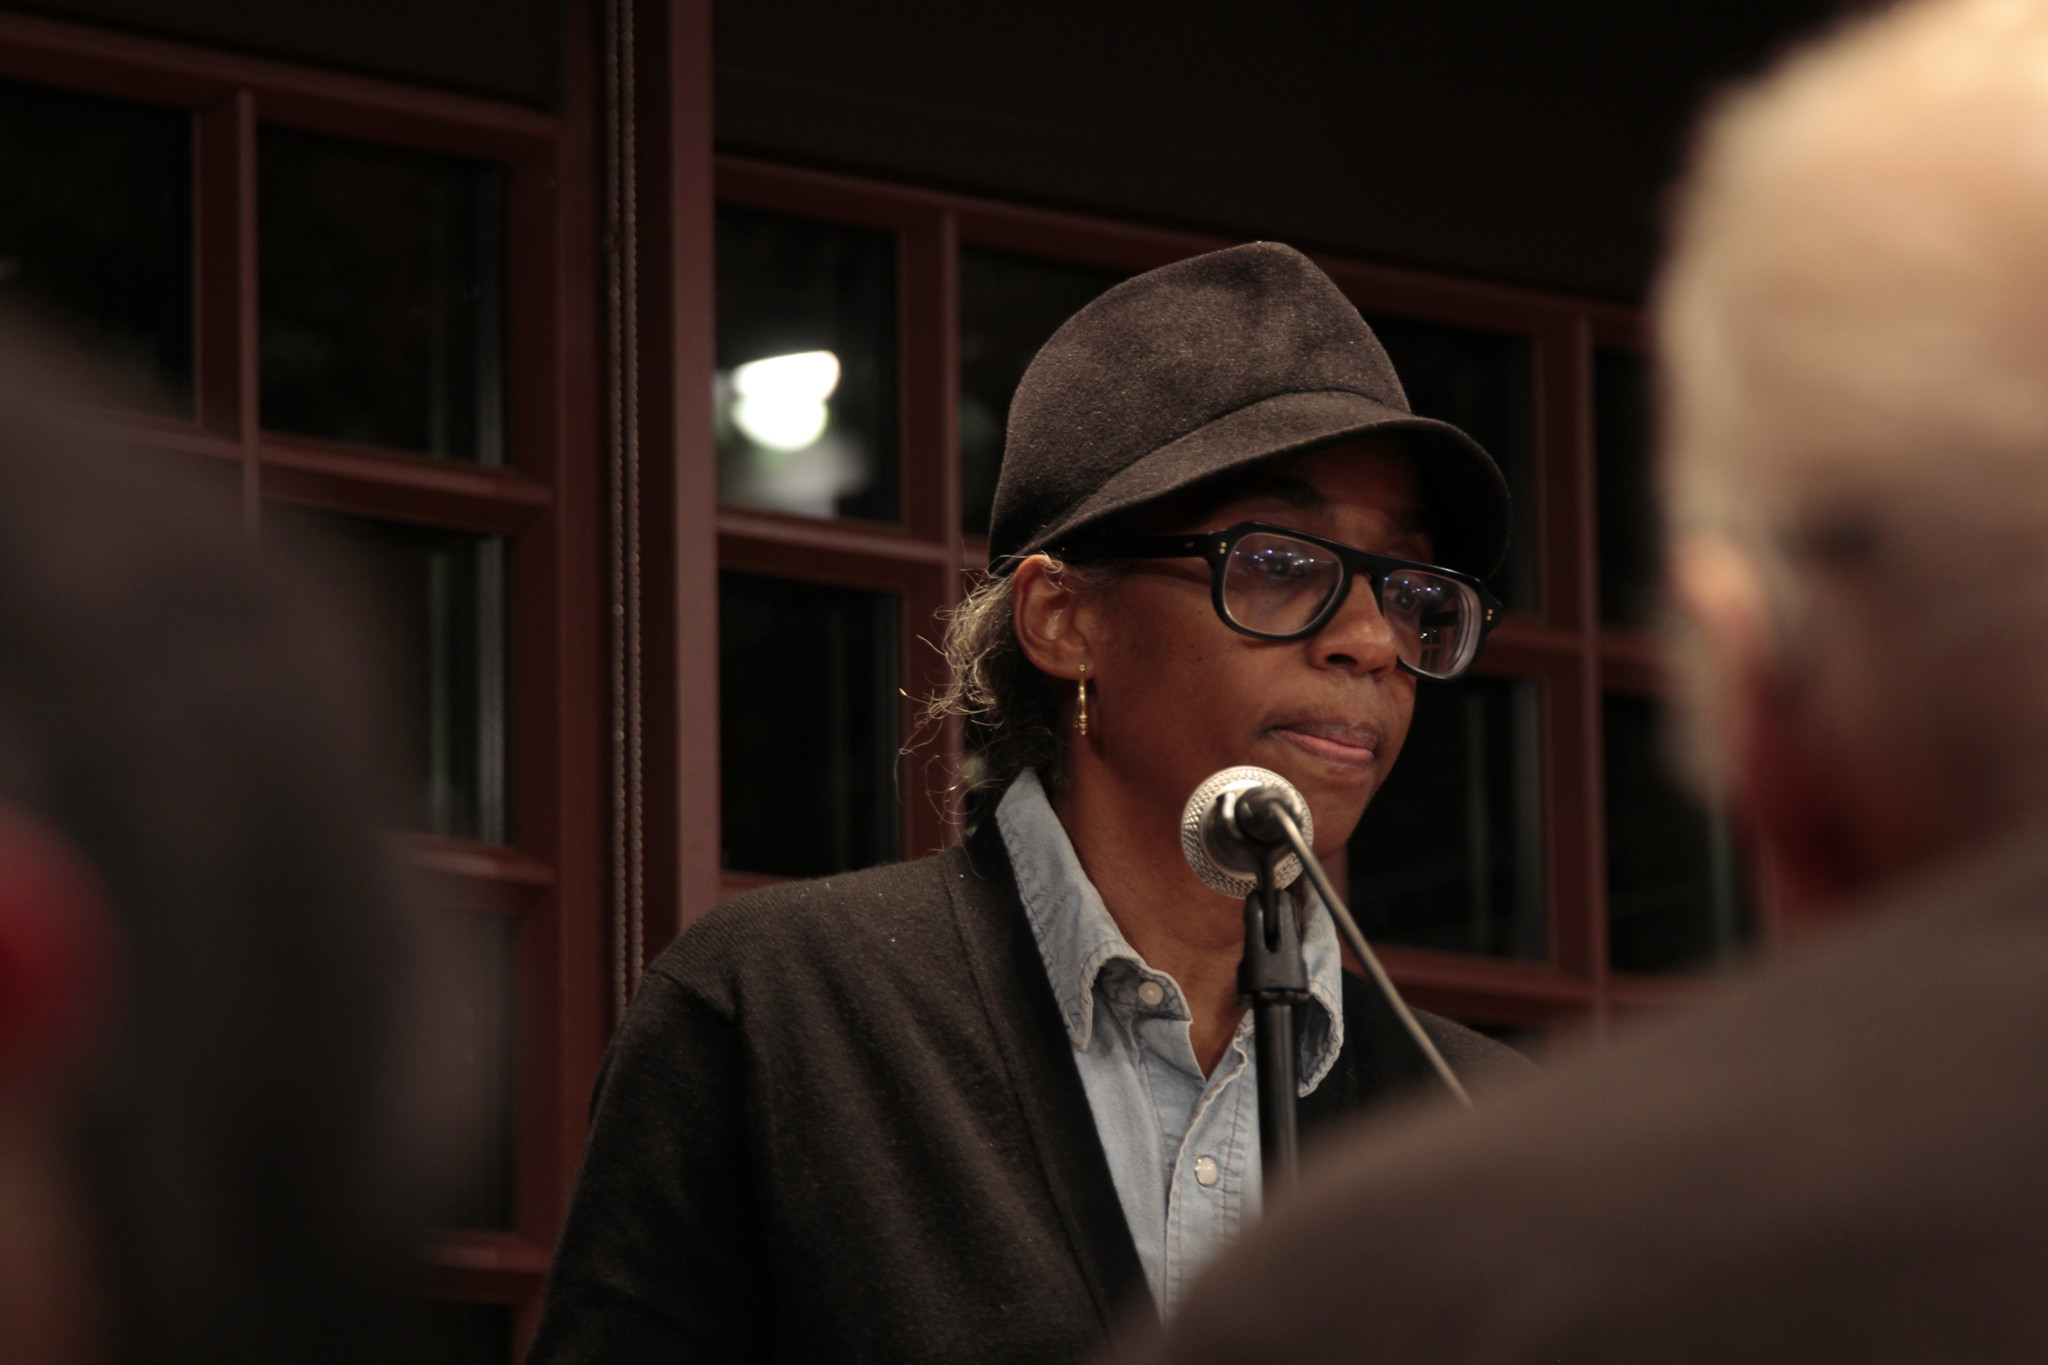 Simone White wearing a hat and glasses reading at a microphone.